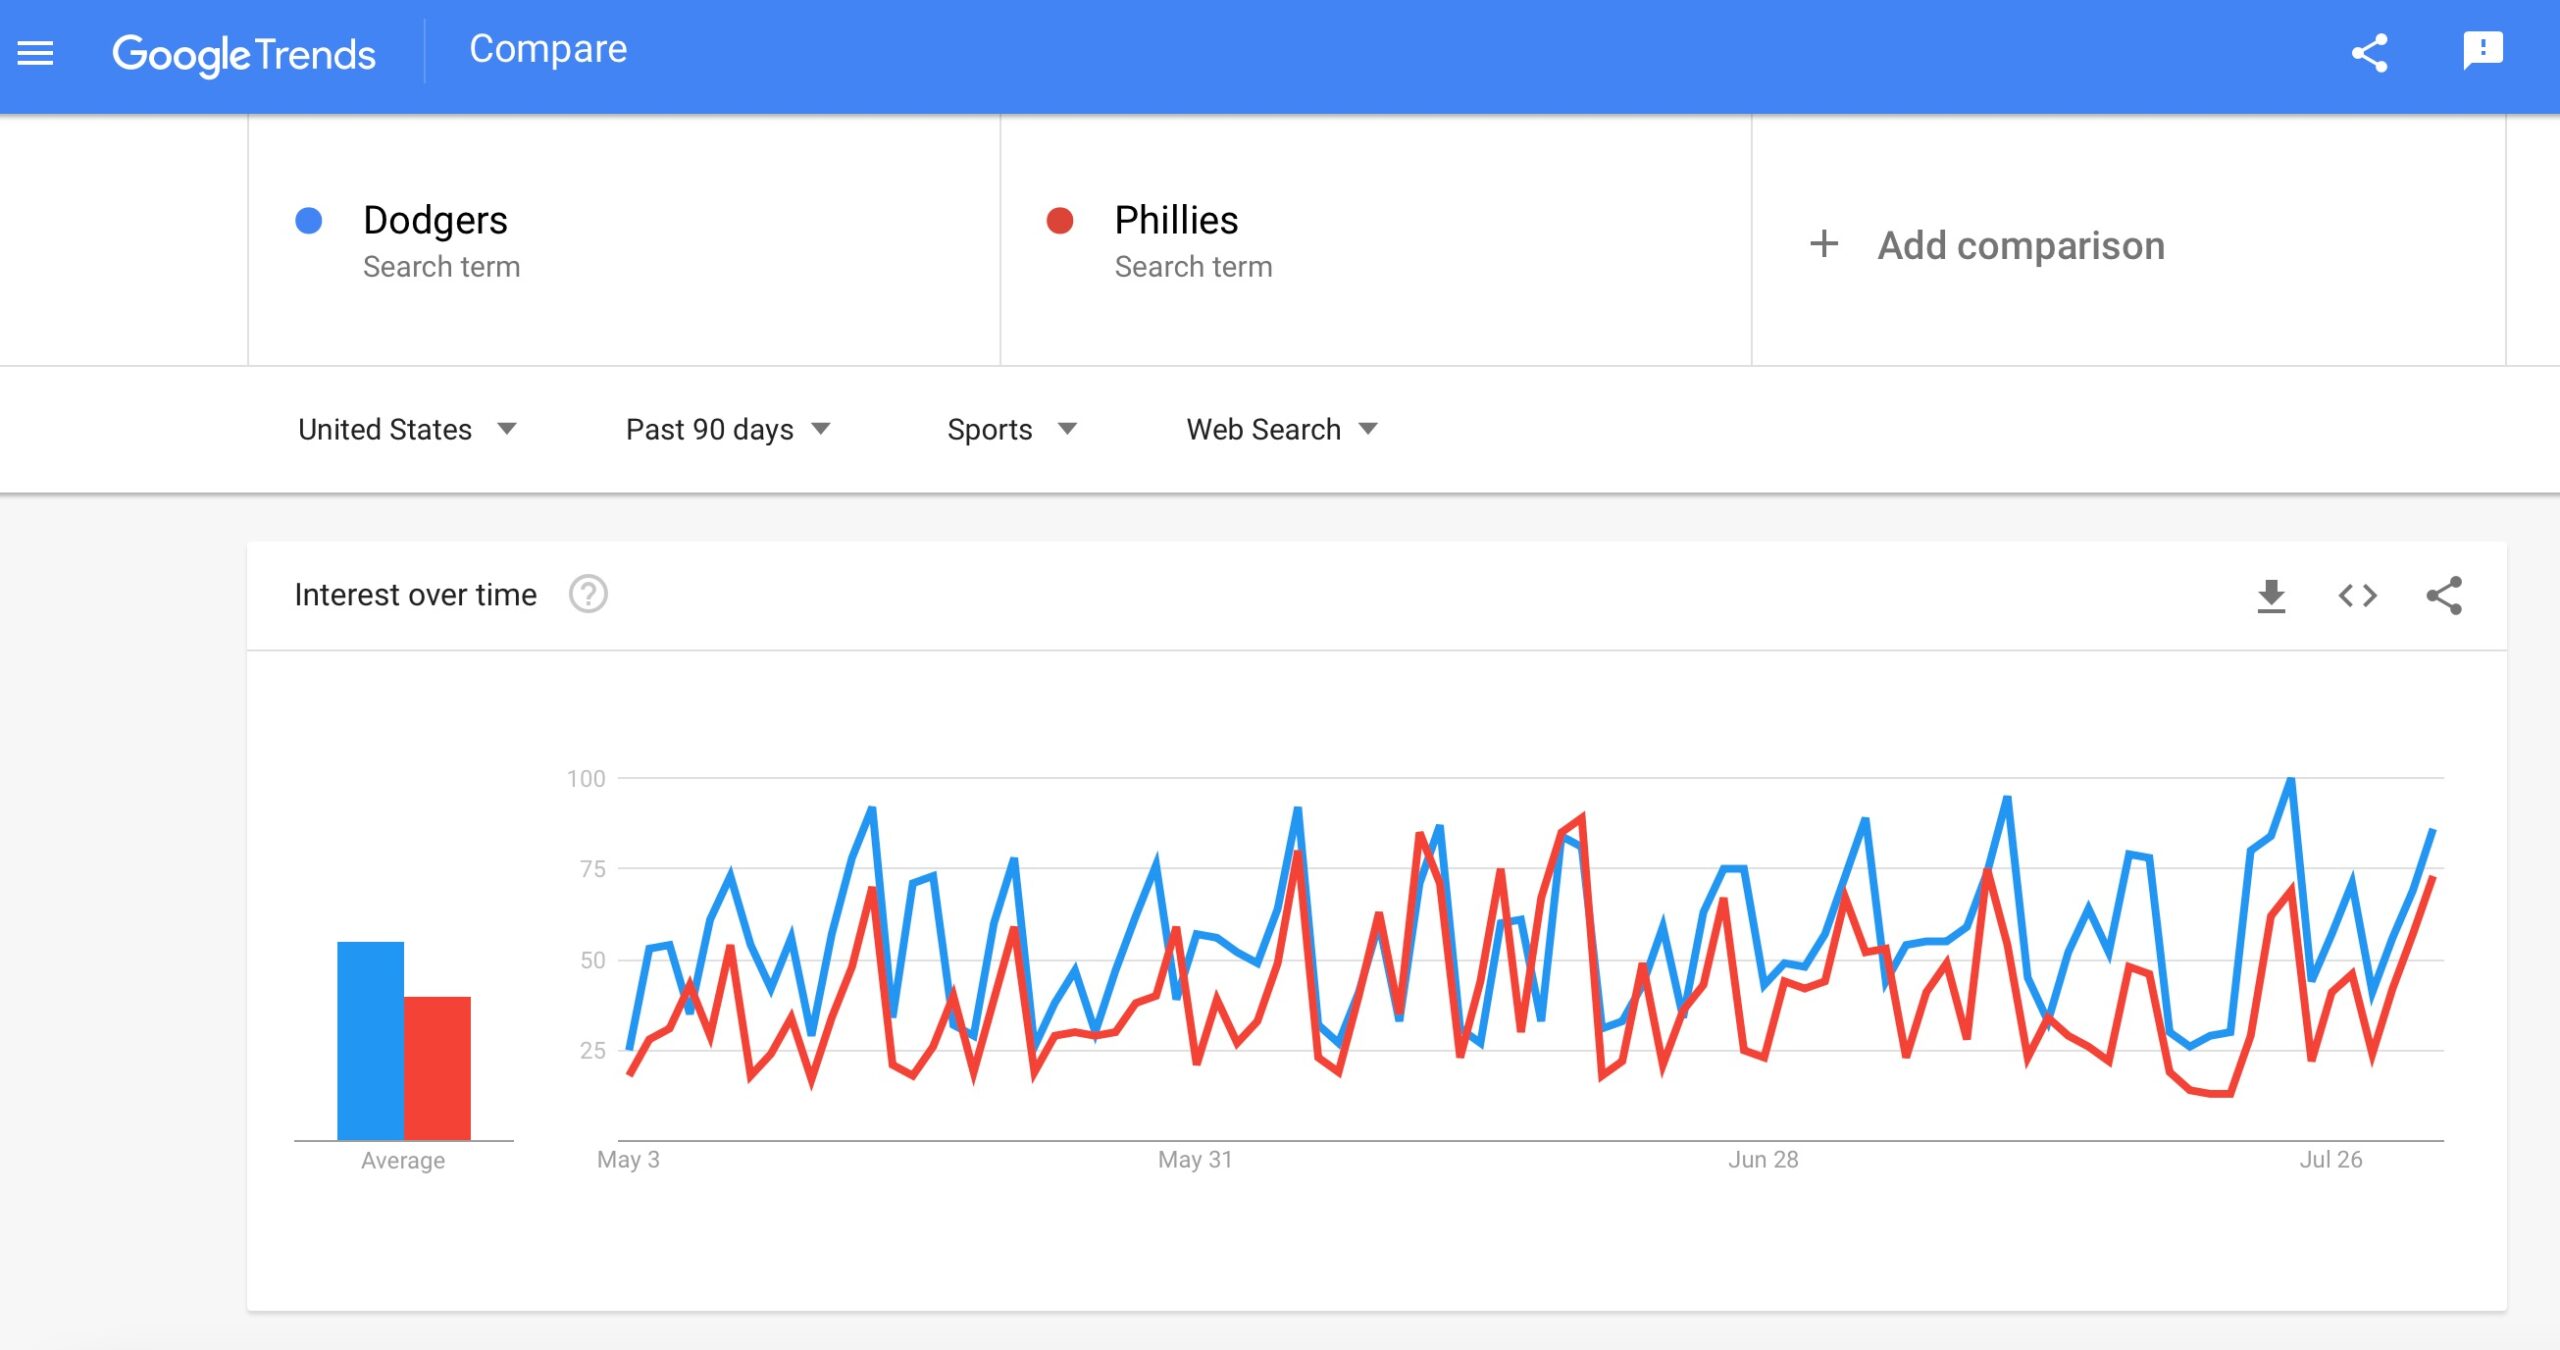 Screenshot of a Google Trends search comparing the Dodgers and Phillies